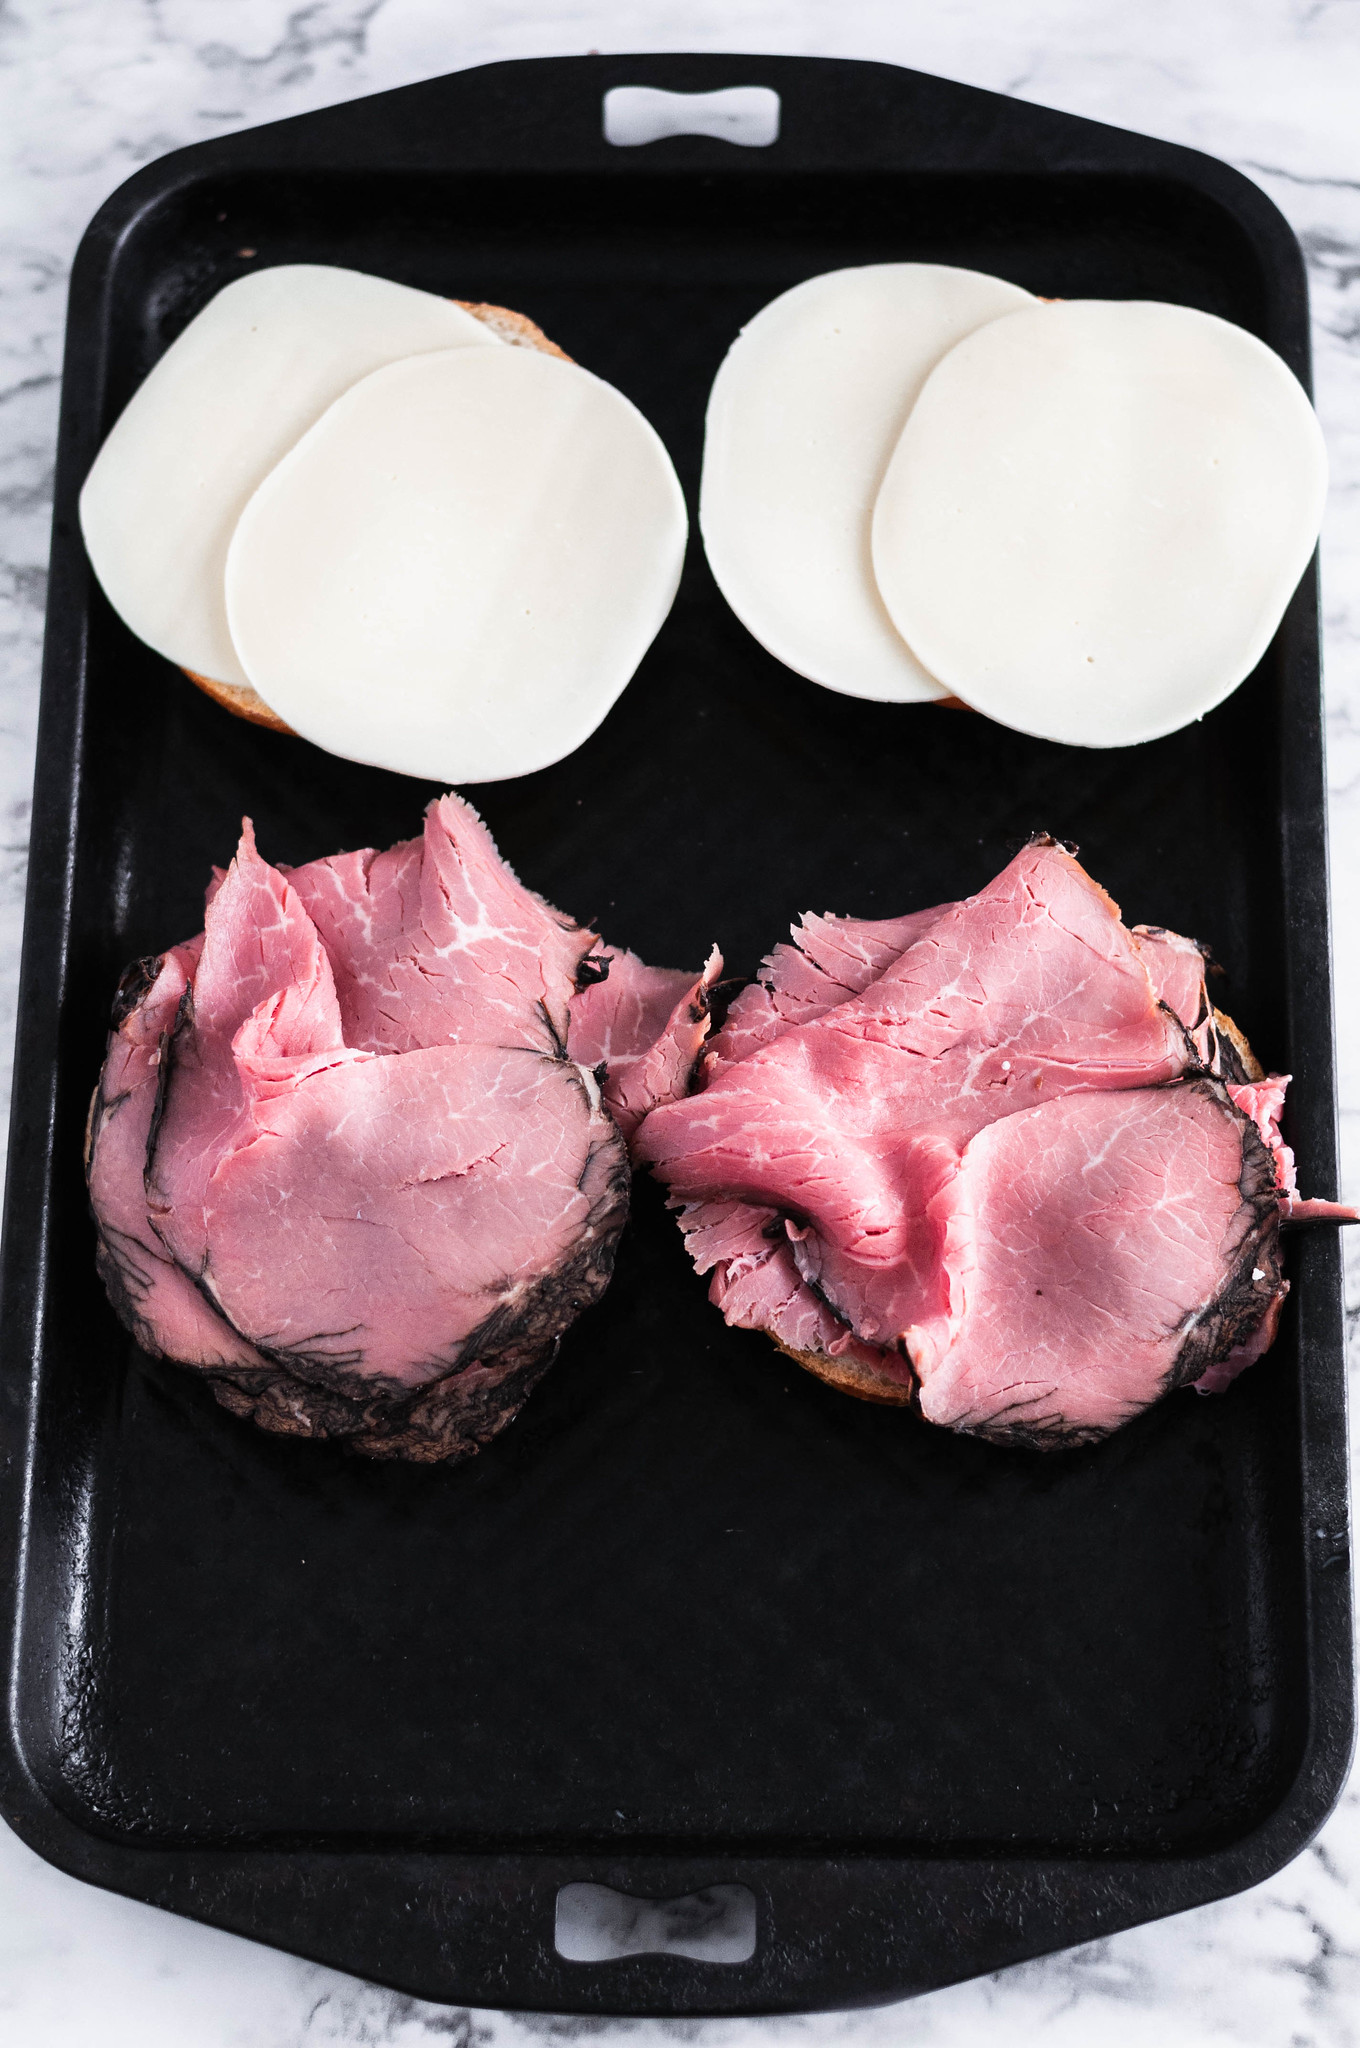 Meet your new favorite 15 minute meal, the Roast Beef Melt. Deli roast beef, melted provolone and horseradish sauce all on a crusty roll and toasted to perfection under the broiler.